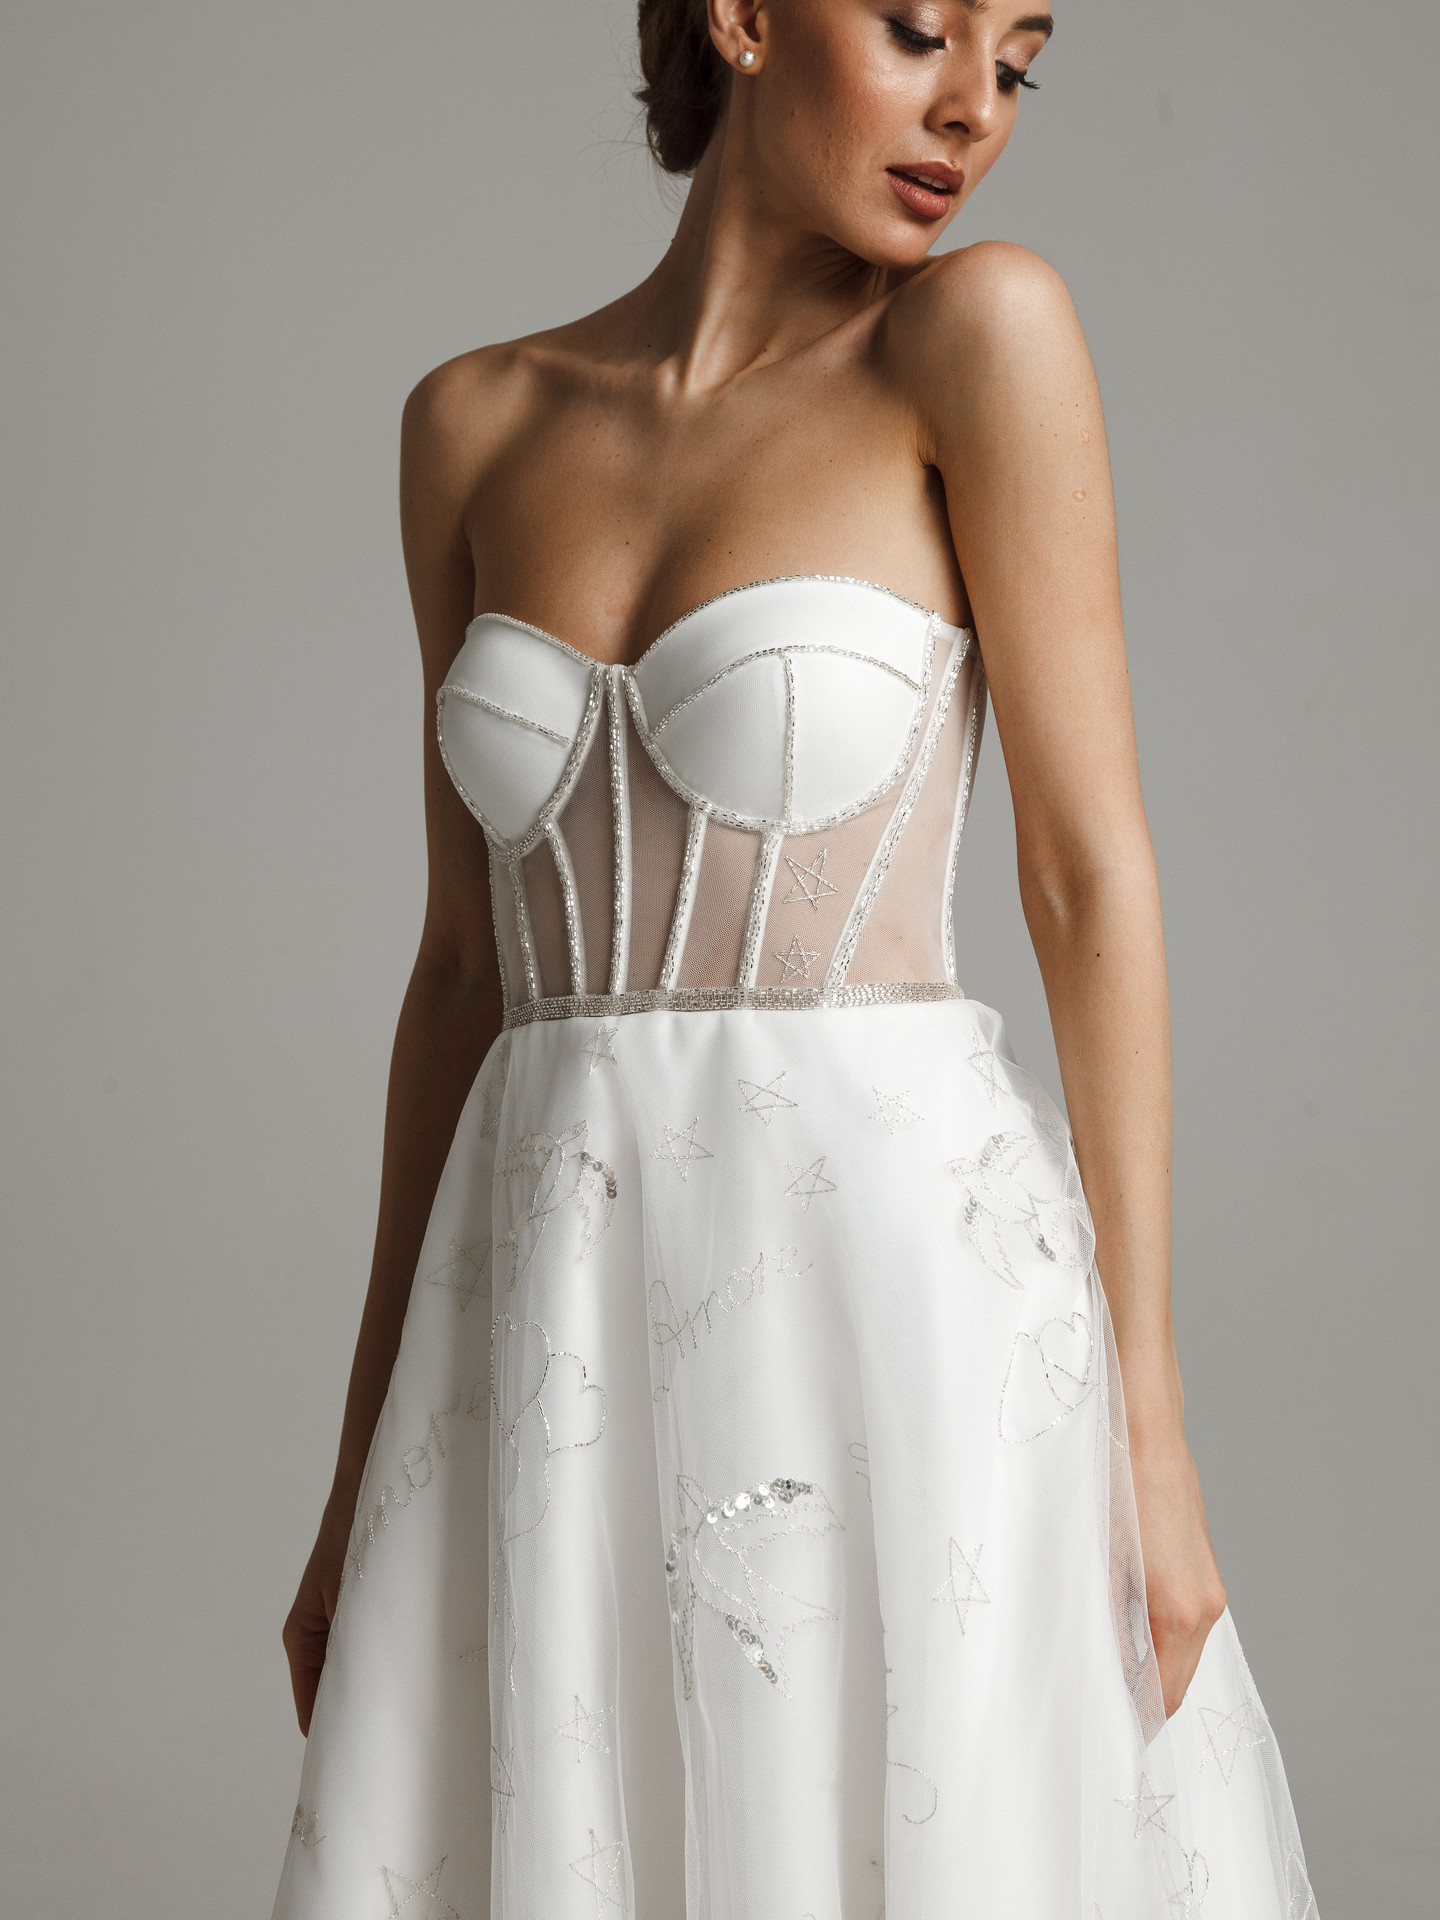 Amoret gown, 2021, couture, dress, bridal, off-white, A-line, embroidery, lacing corset